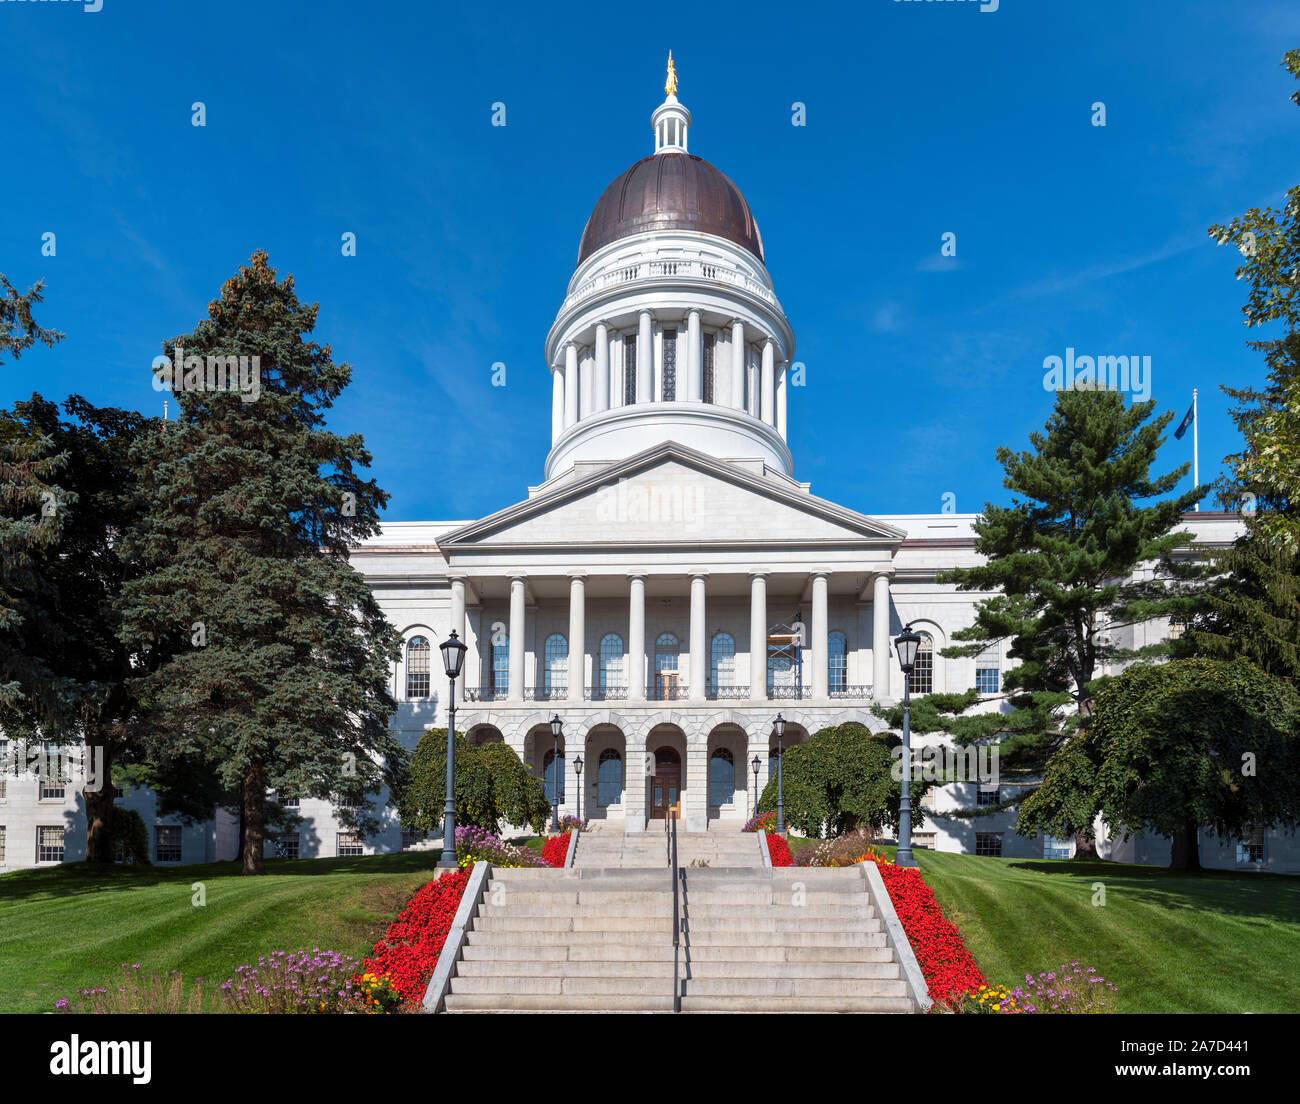 Albums 102+ Images when did augusta become the capital of maine Full HD, 2k, 4k